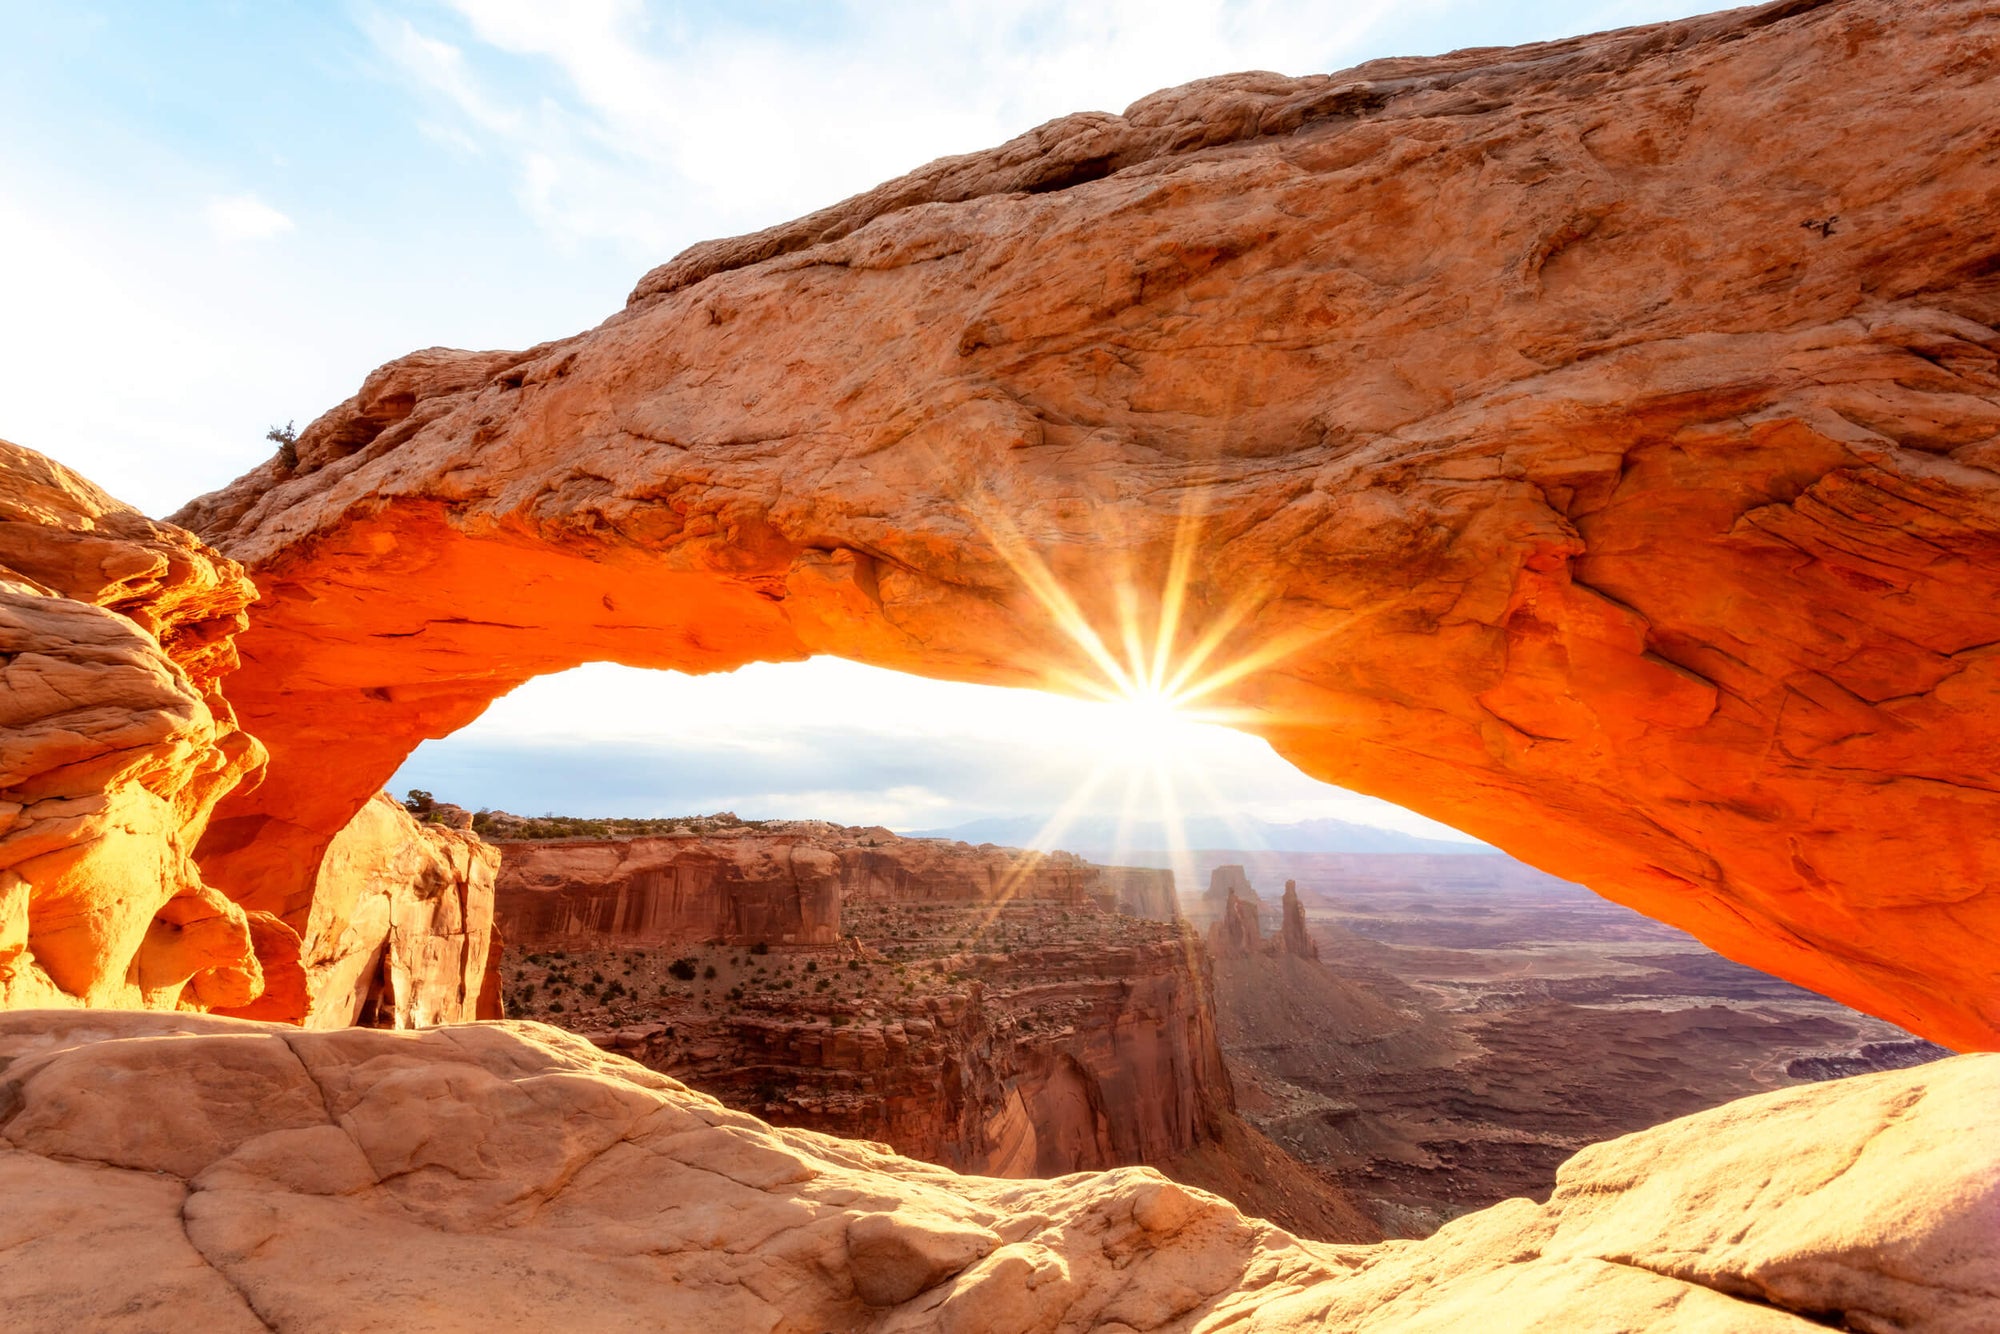 A Mesa Arch picture at sunrise in Canyonlands National Park near Moab, utah.